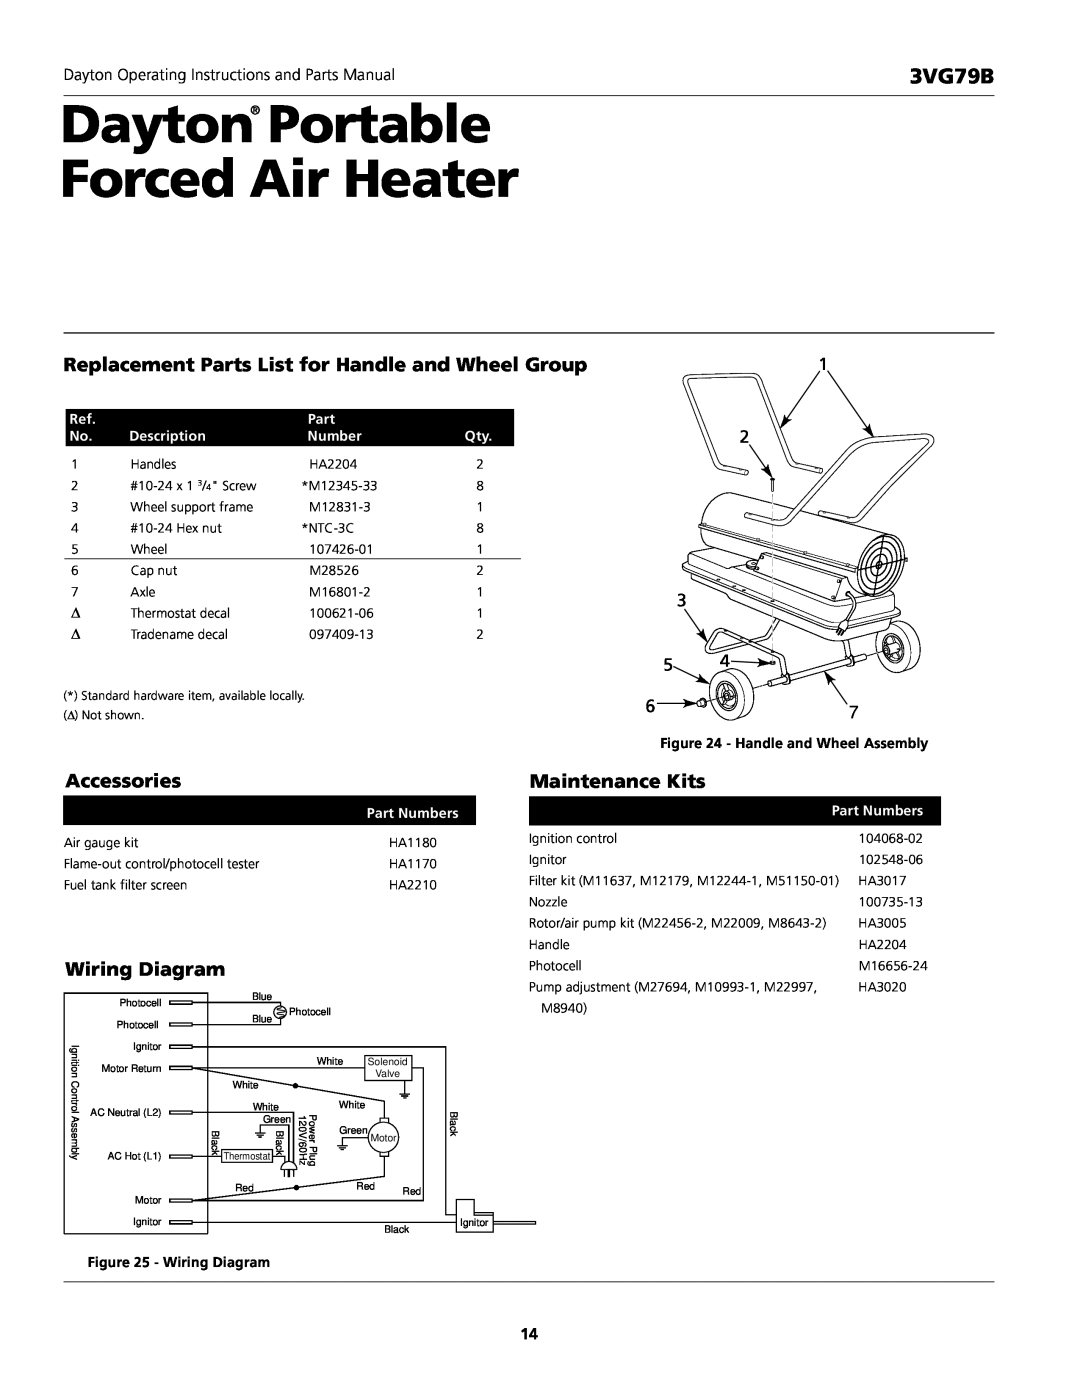 Dayton 3VG79B Dayton Portable Forced Air Heater, Replacement Parts List for Handle and Wheel Group, Accessories 